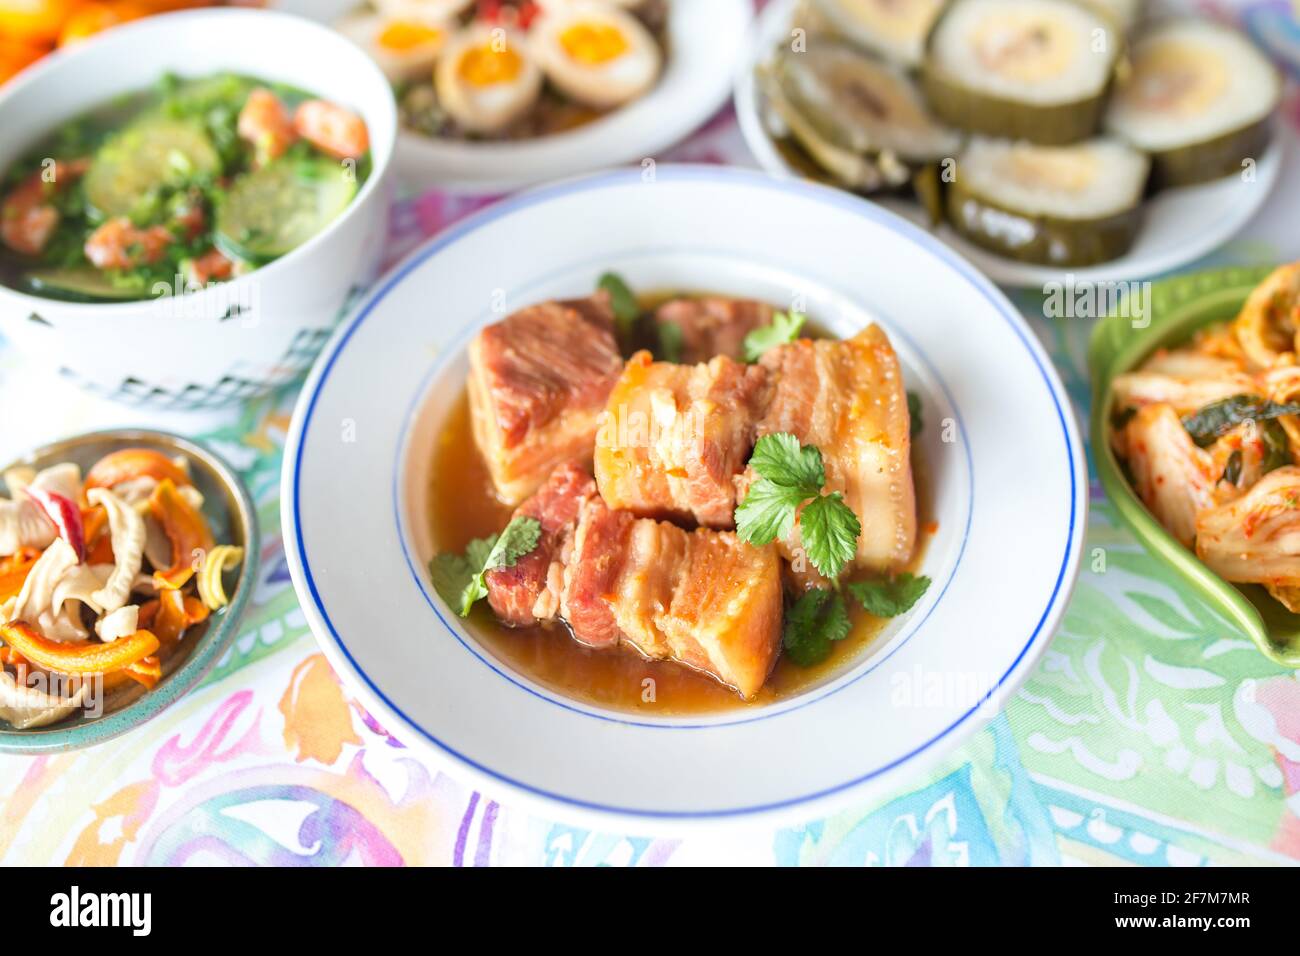 Asian family lunch set in Lunar New Year days focus on caramelized pork belly dish Stock Photo